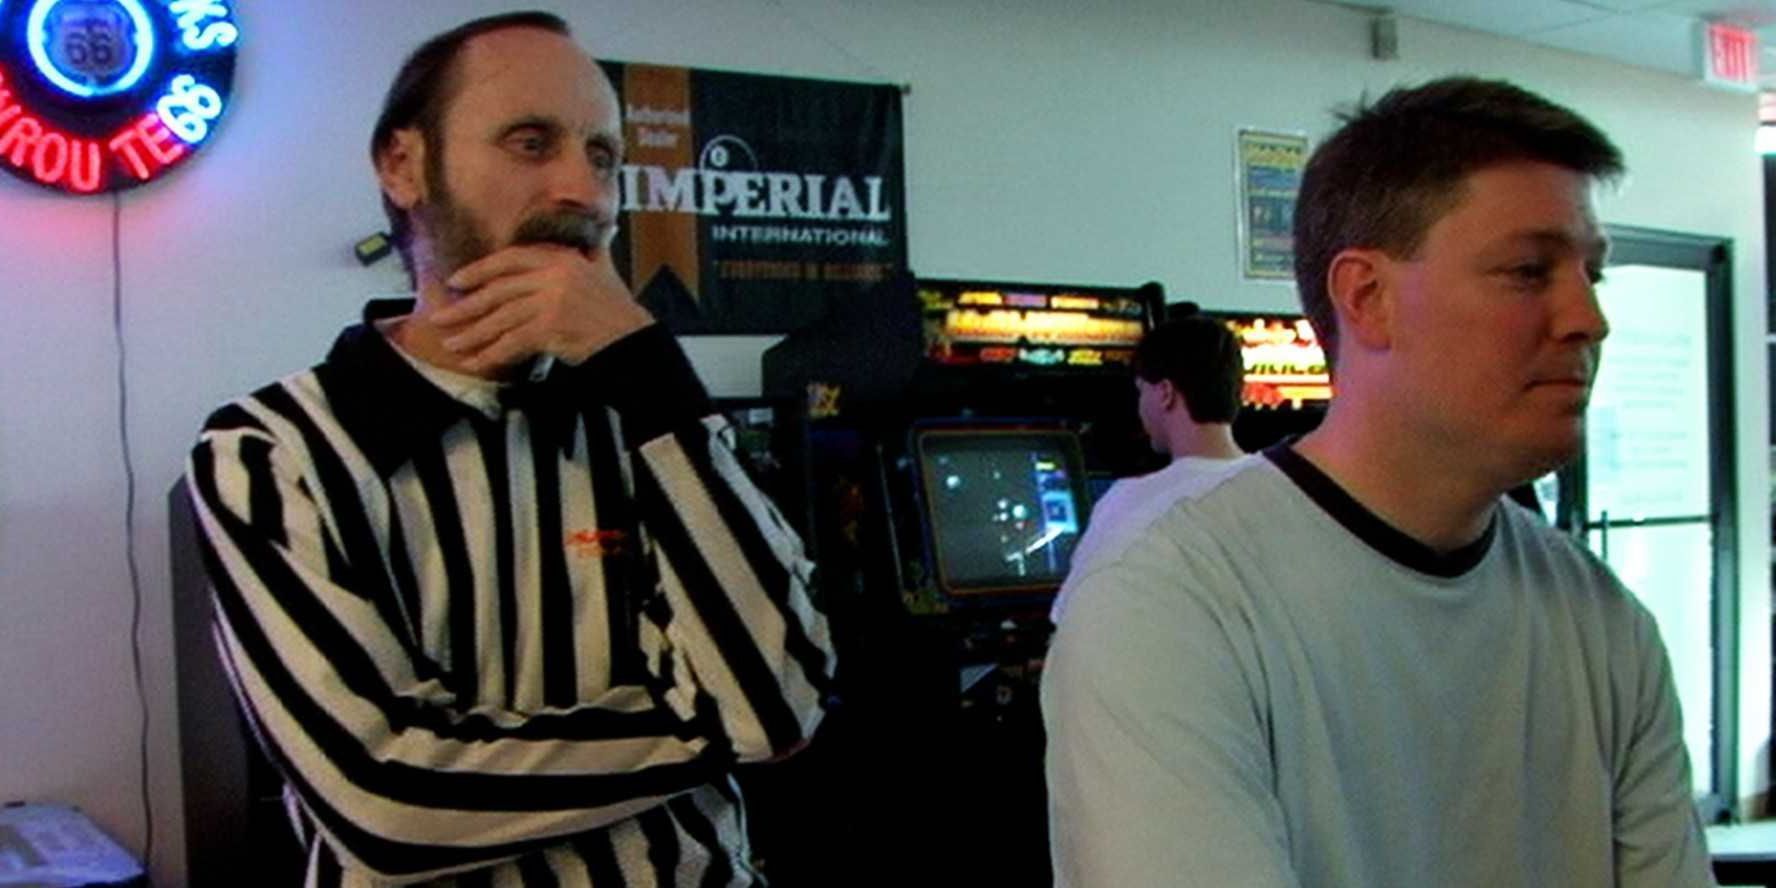 A referee watches a player in an arcade in The King of Kong 